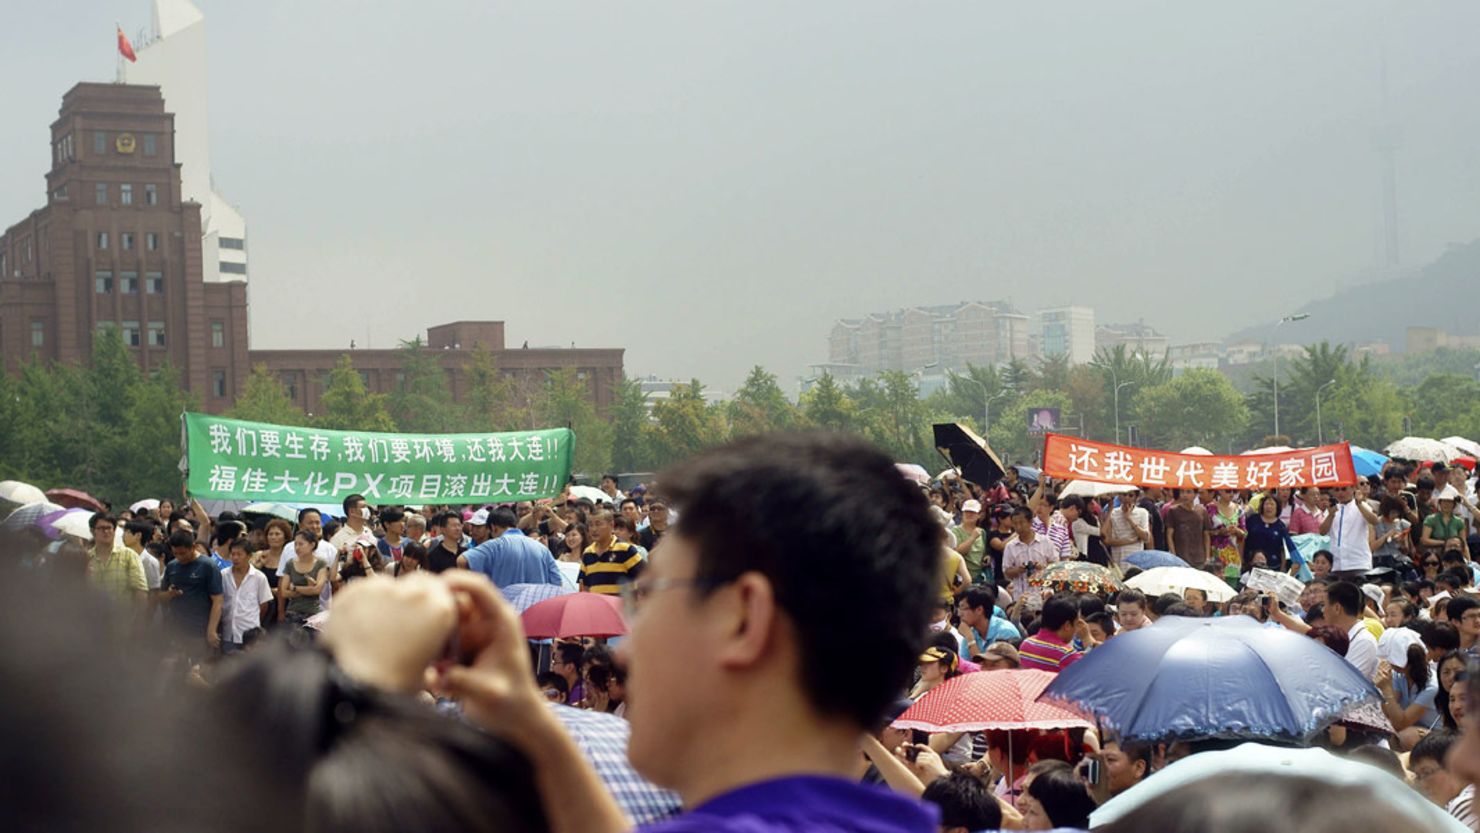 Thousands of people staged a protest outside the Fujia chemical plant in Dalian in August last year.